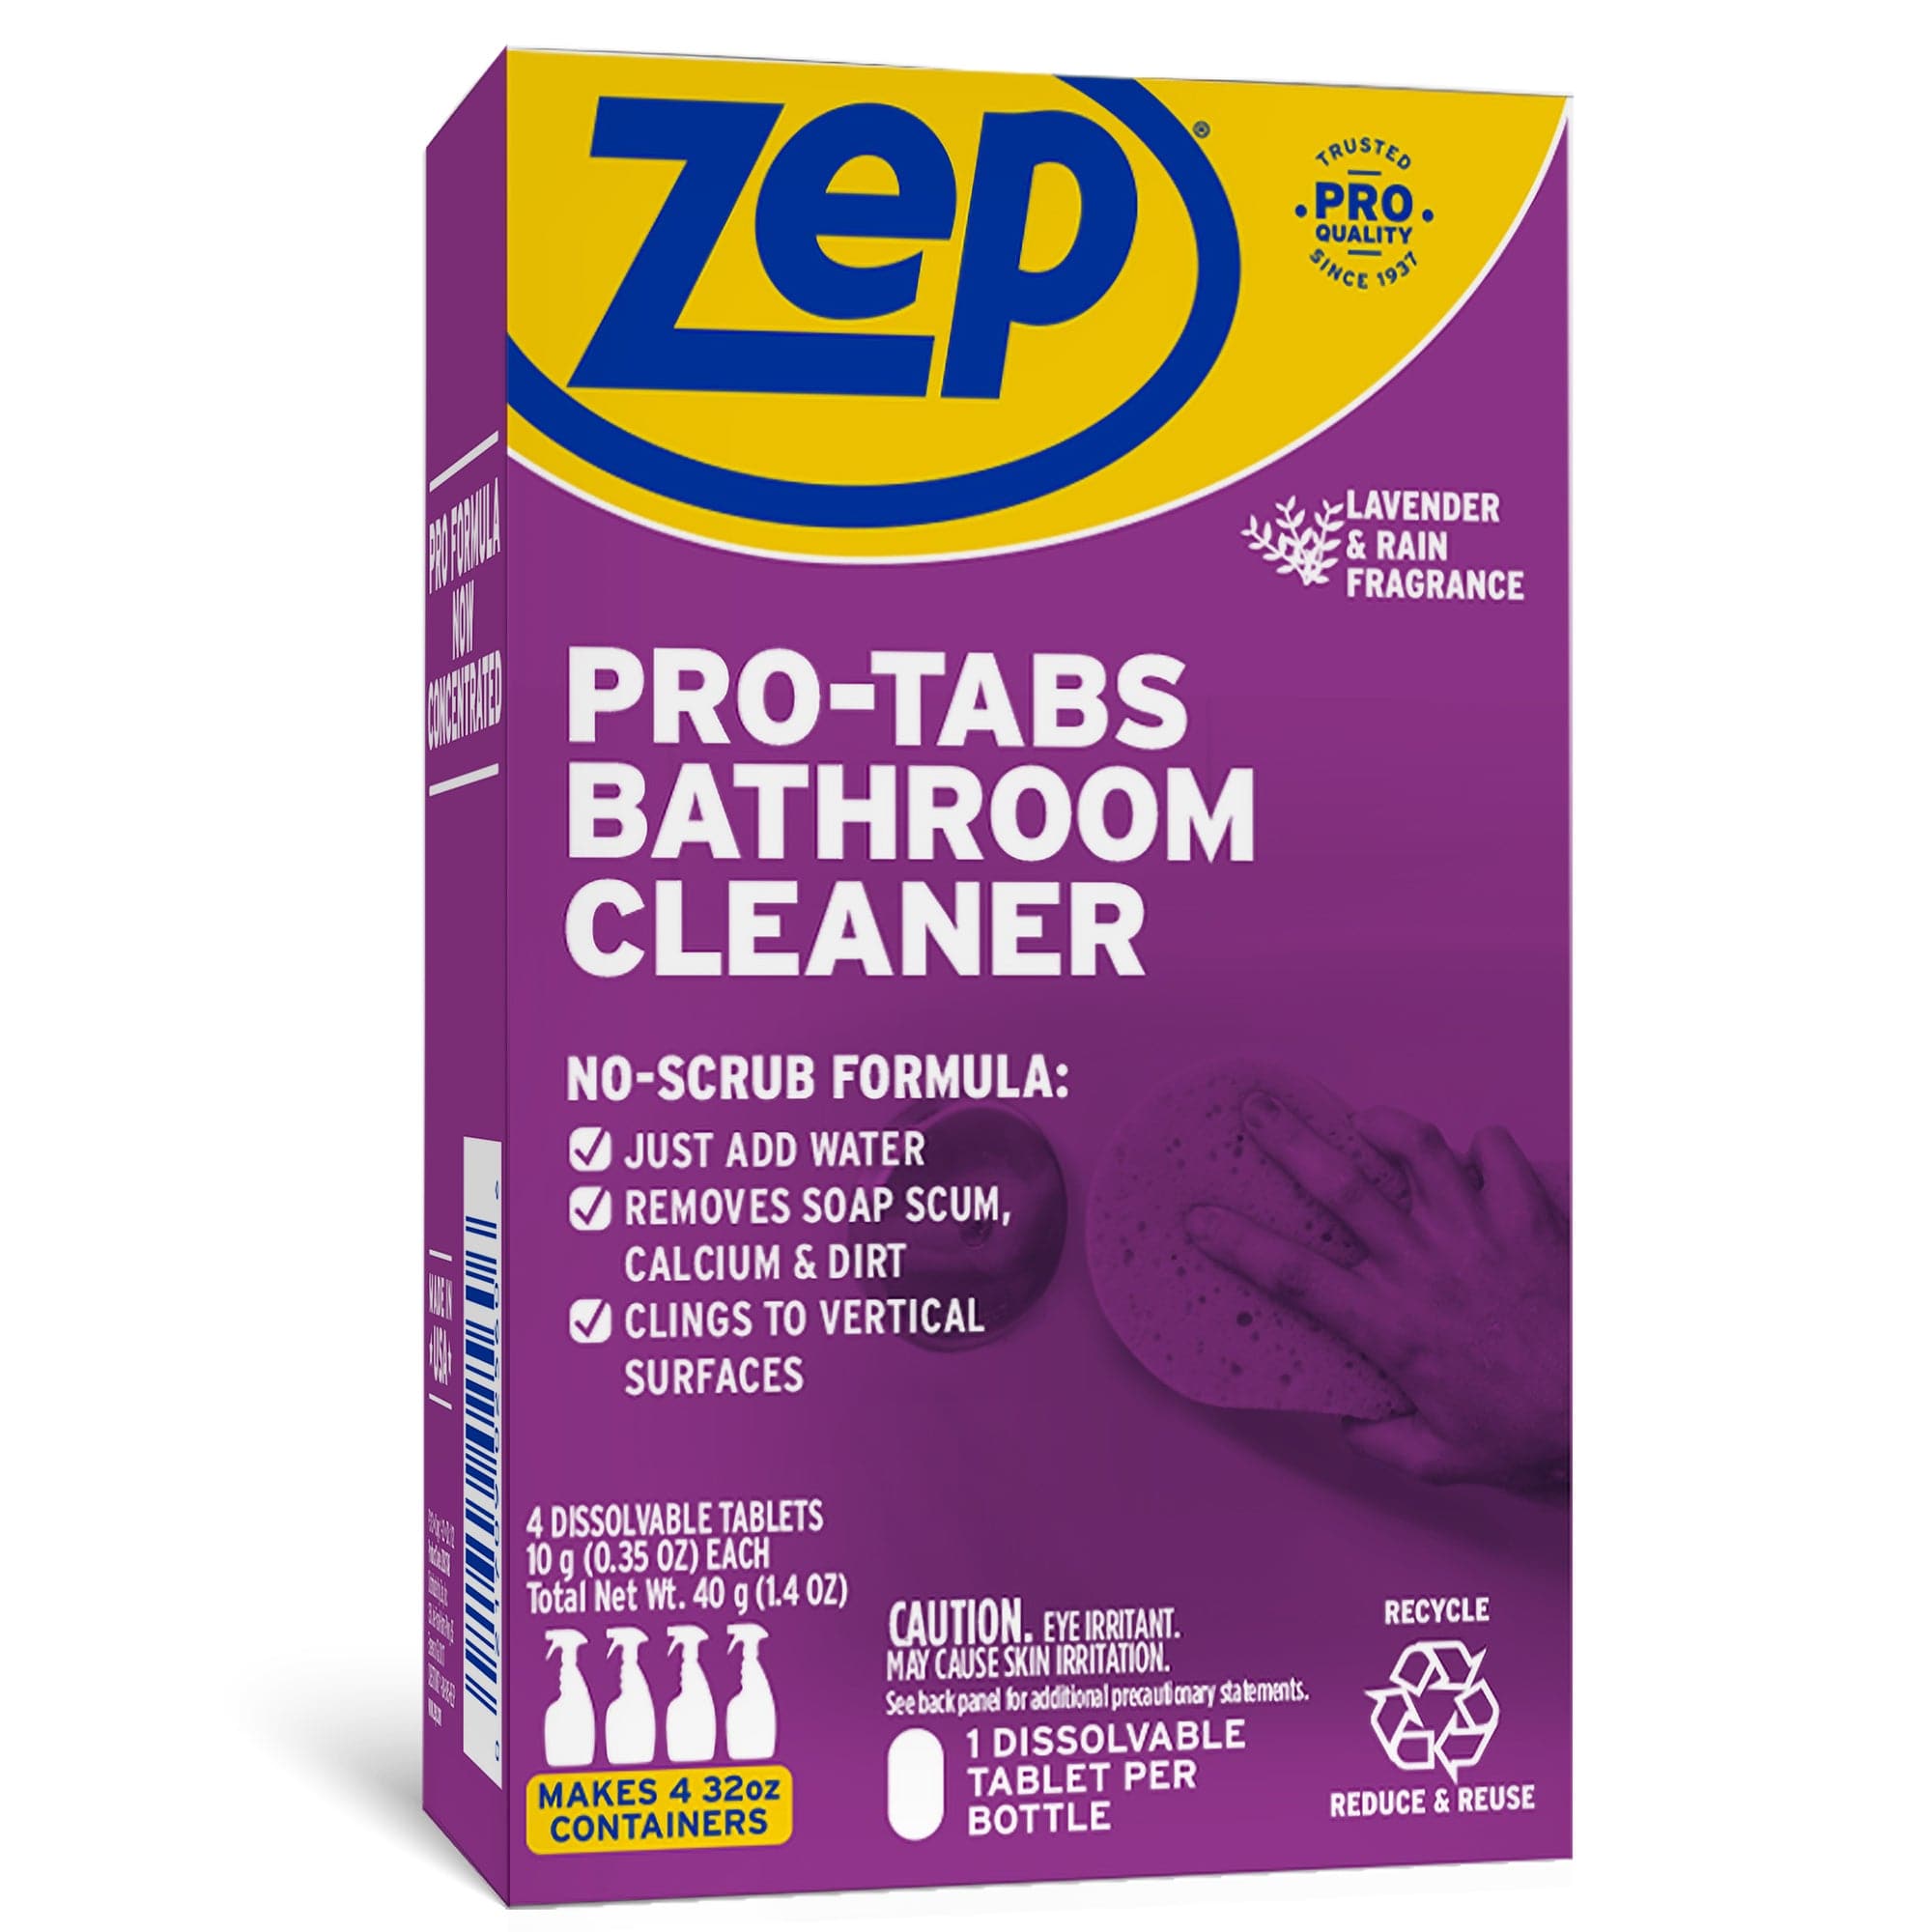 Image for Pro-Tabs Bathroom Cleaner Dissolvable Tablets - 4 Tablets Per Box (10 Pack)